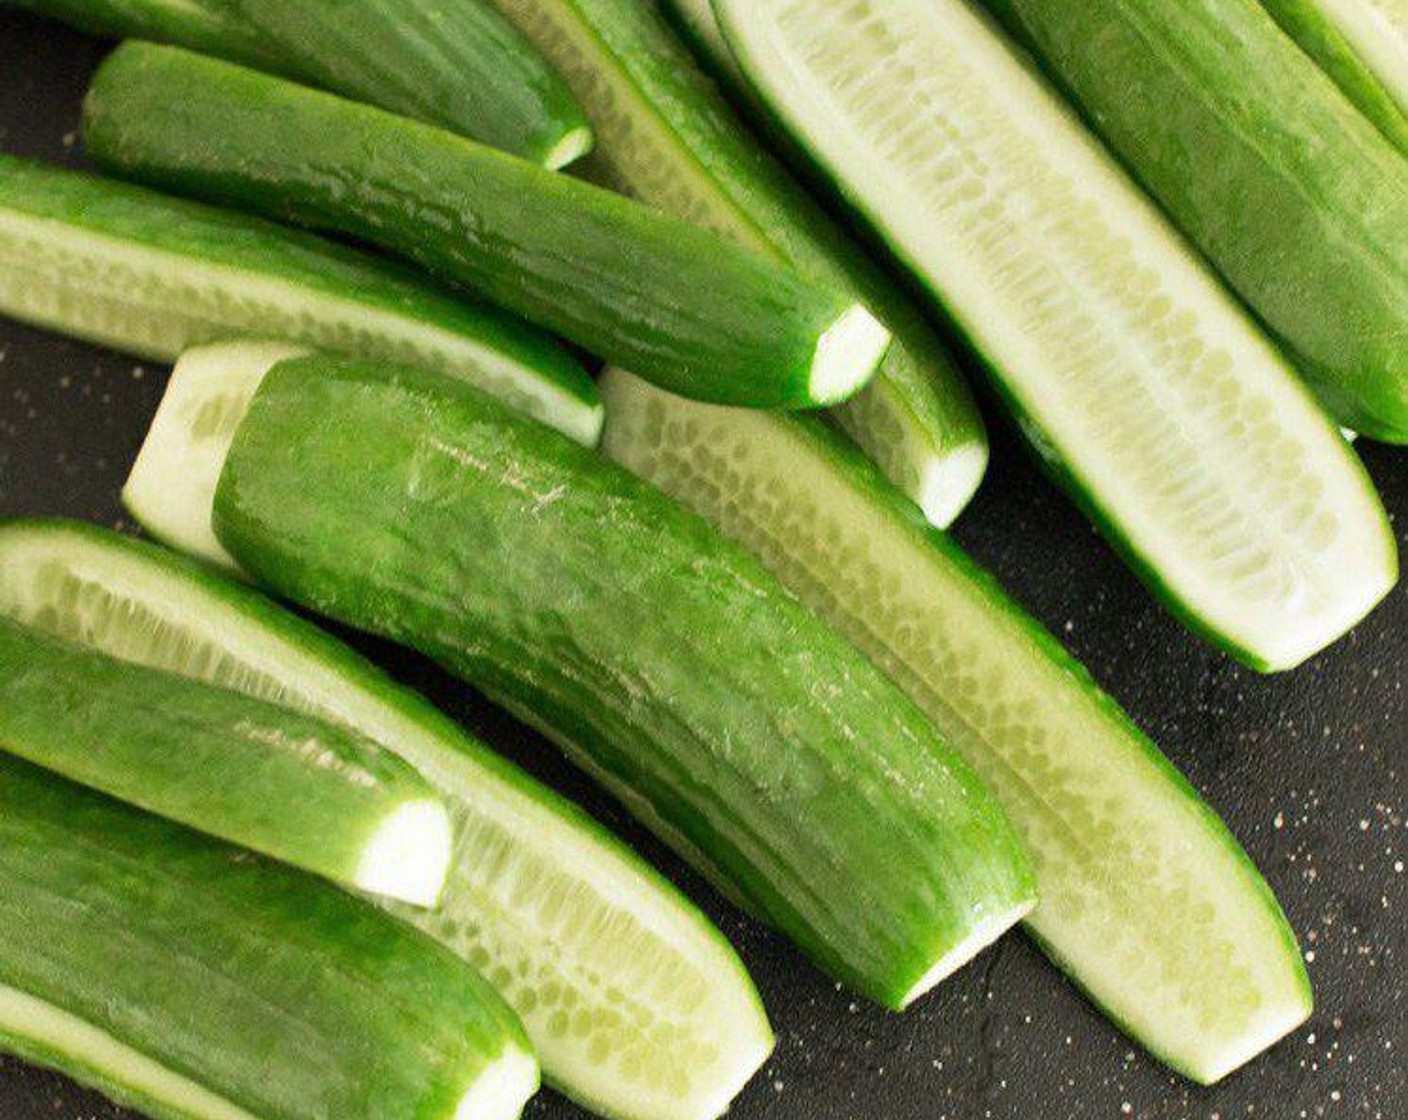 step 1 Cut off the ends of the Persian Cucumbers (9 2/3 cups) and slice them in half long-ways.